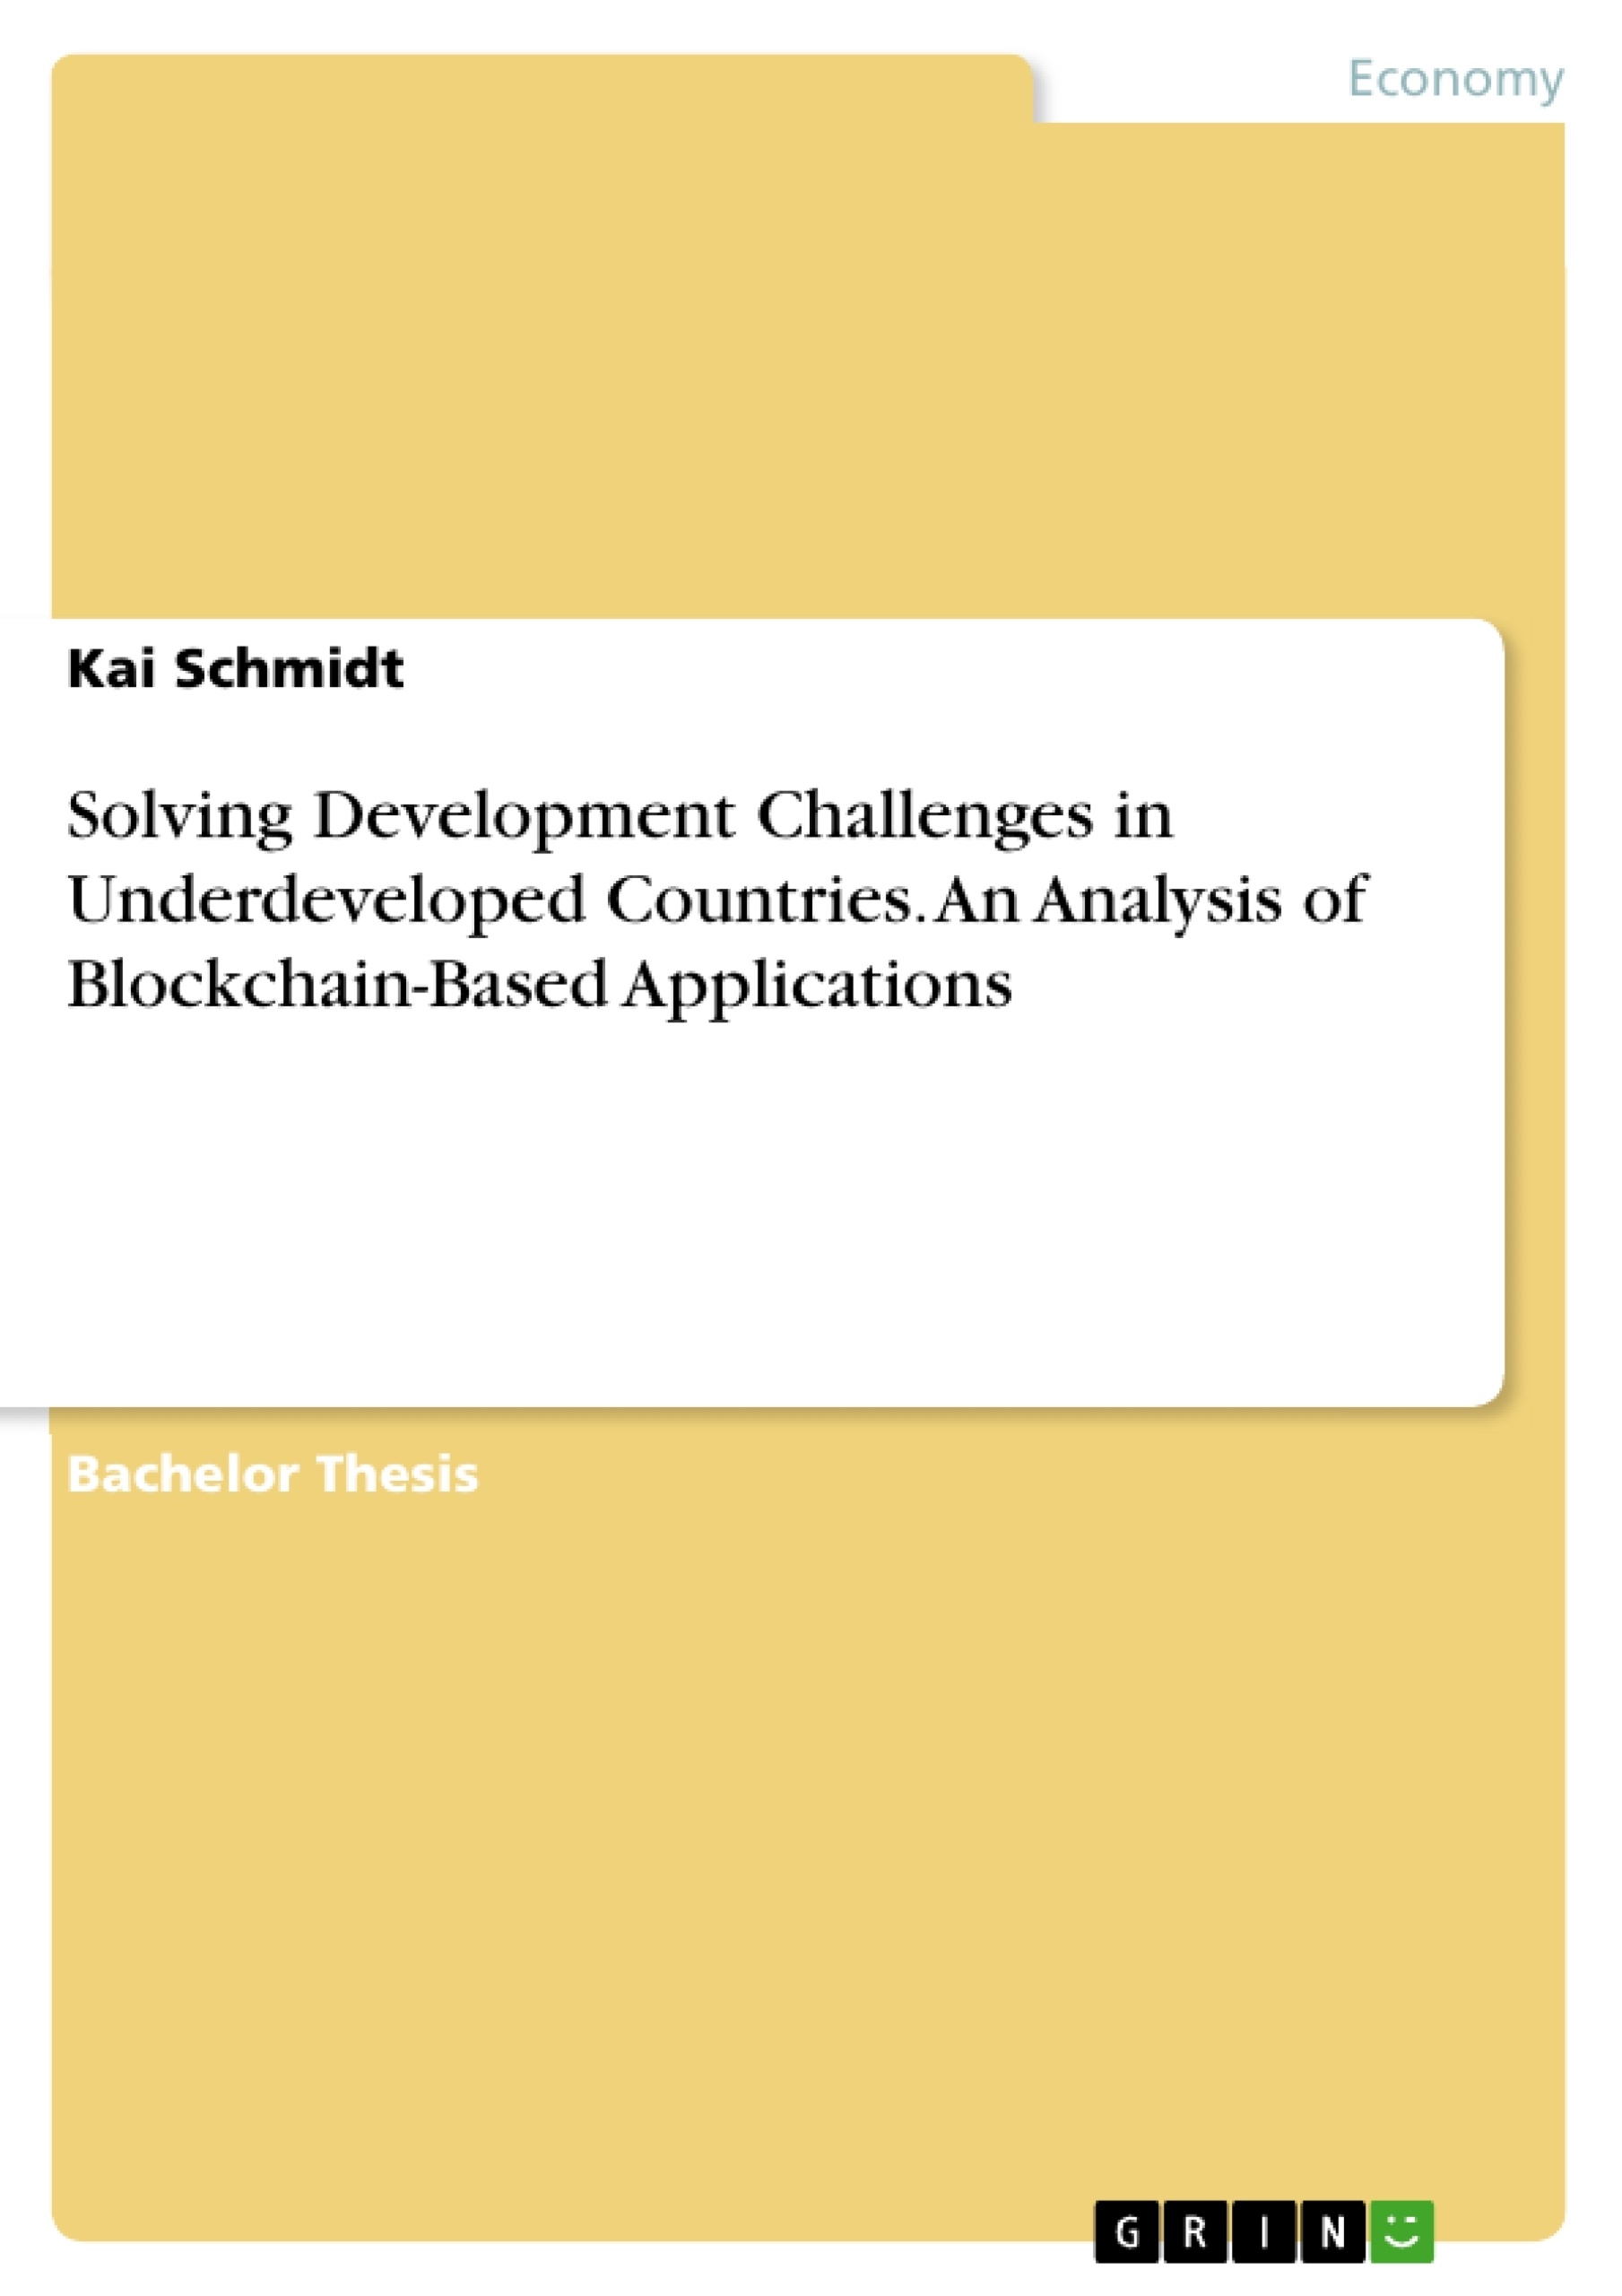 Título: Solving Development Challenges in Underdeveloped Countries. An Analysis of Blockchain-Based Applications